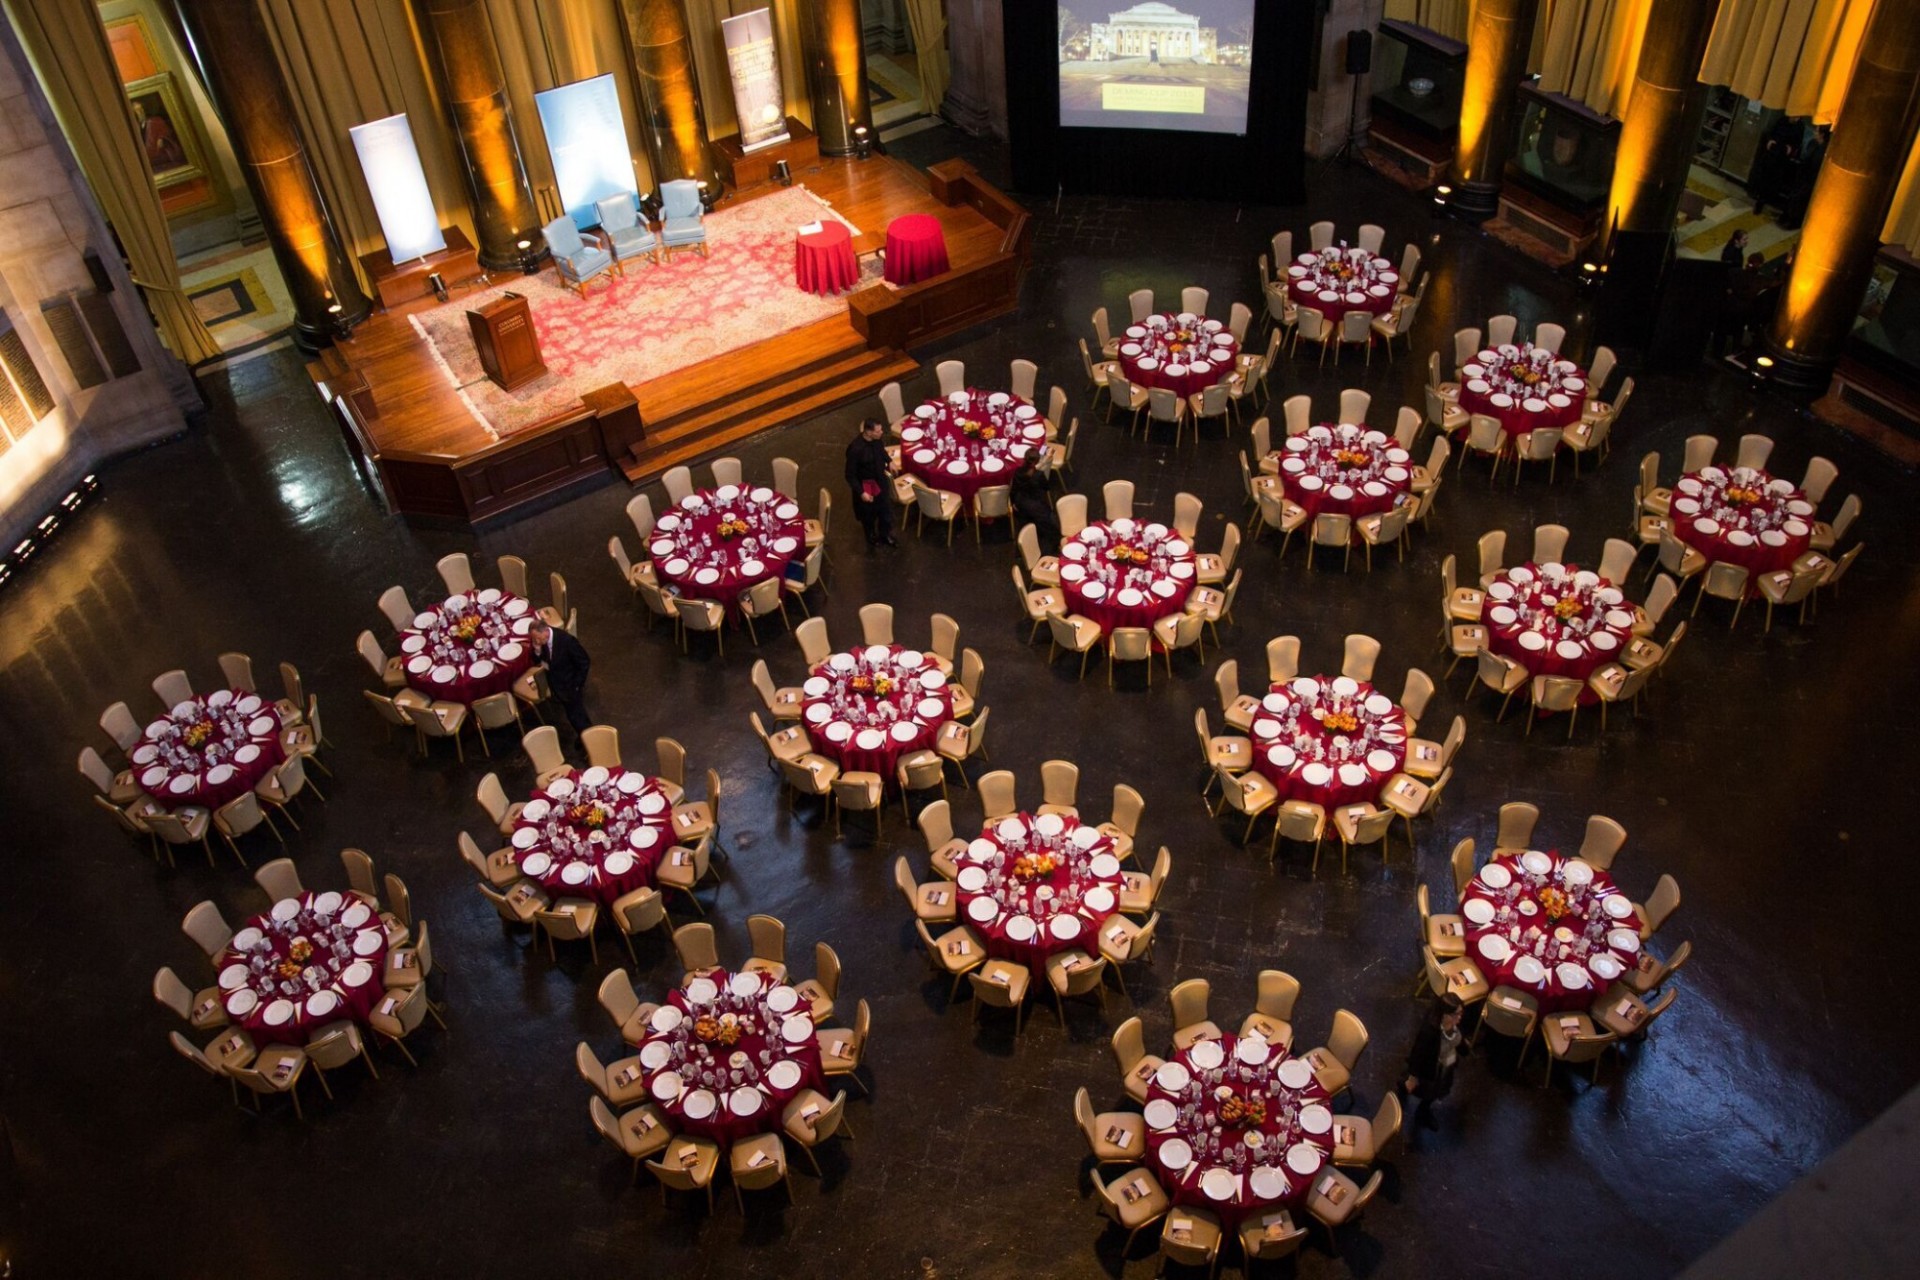 Aerial view of the Rotunda, showing round tables set with red linens and a wooden stage with three chairs.